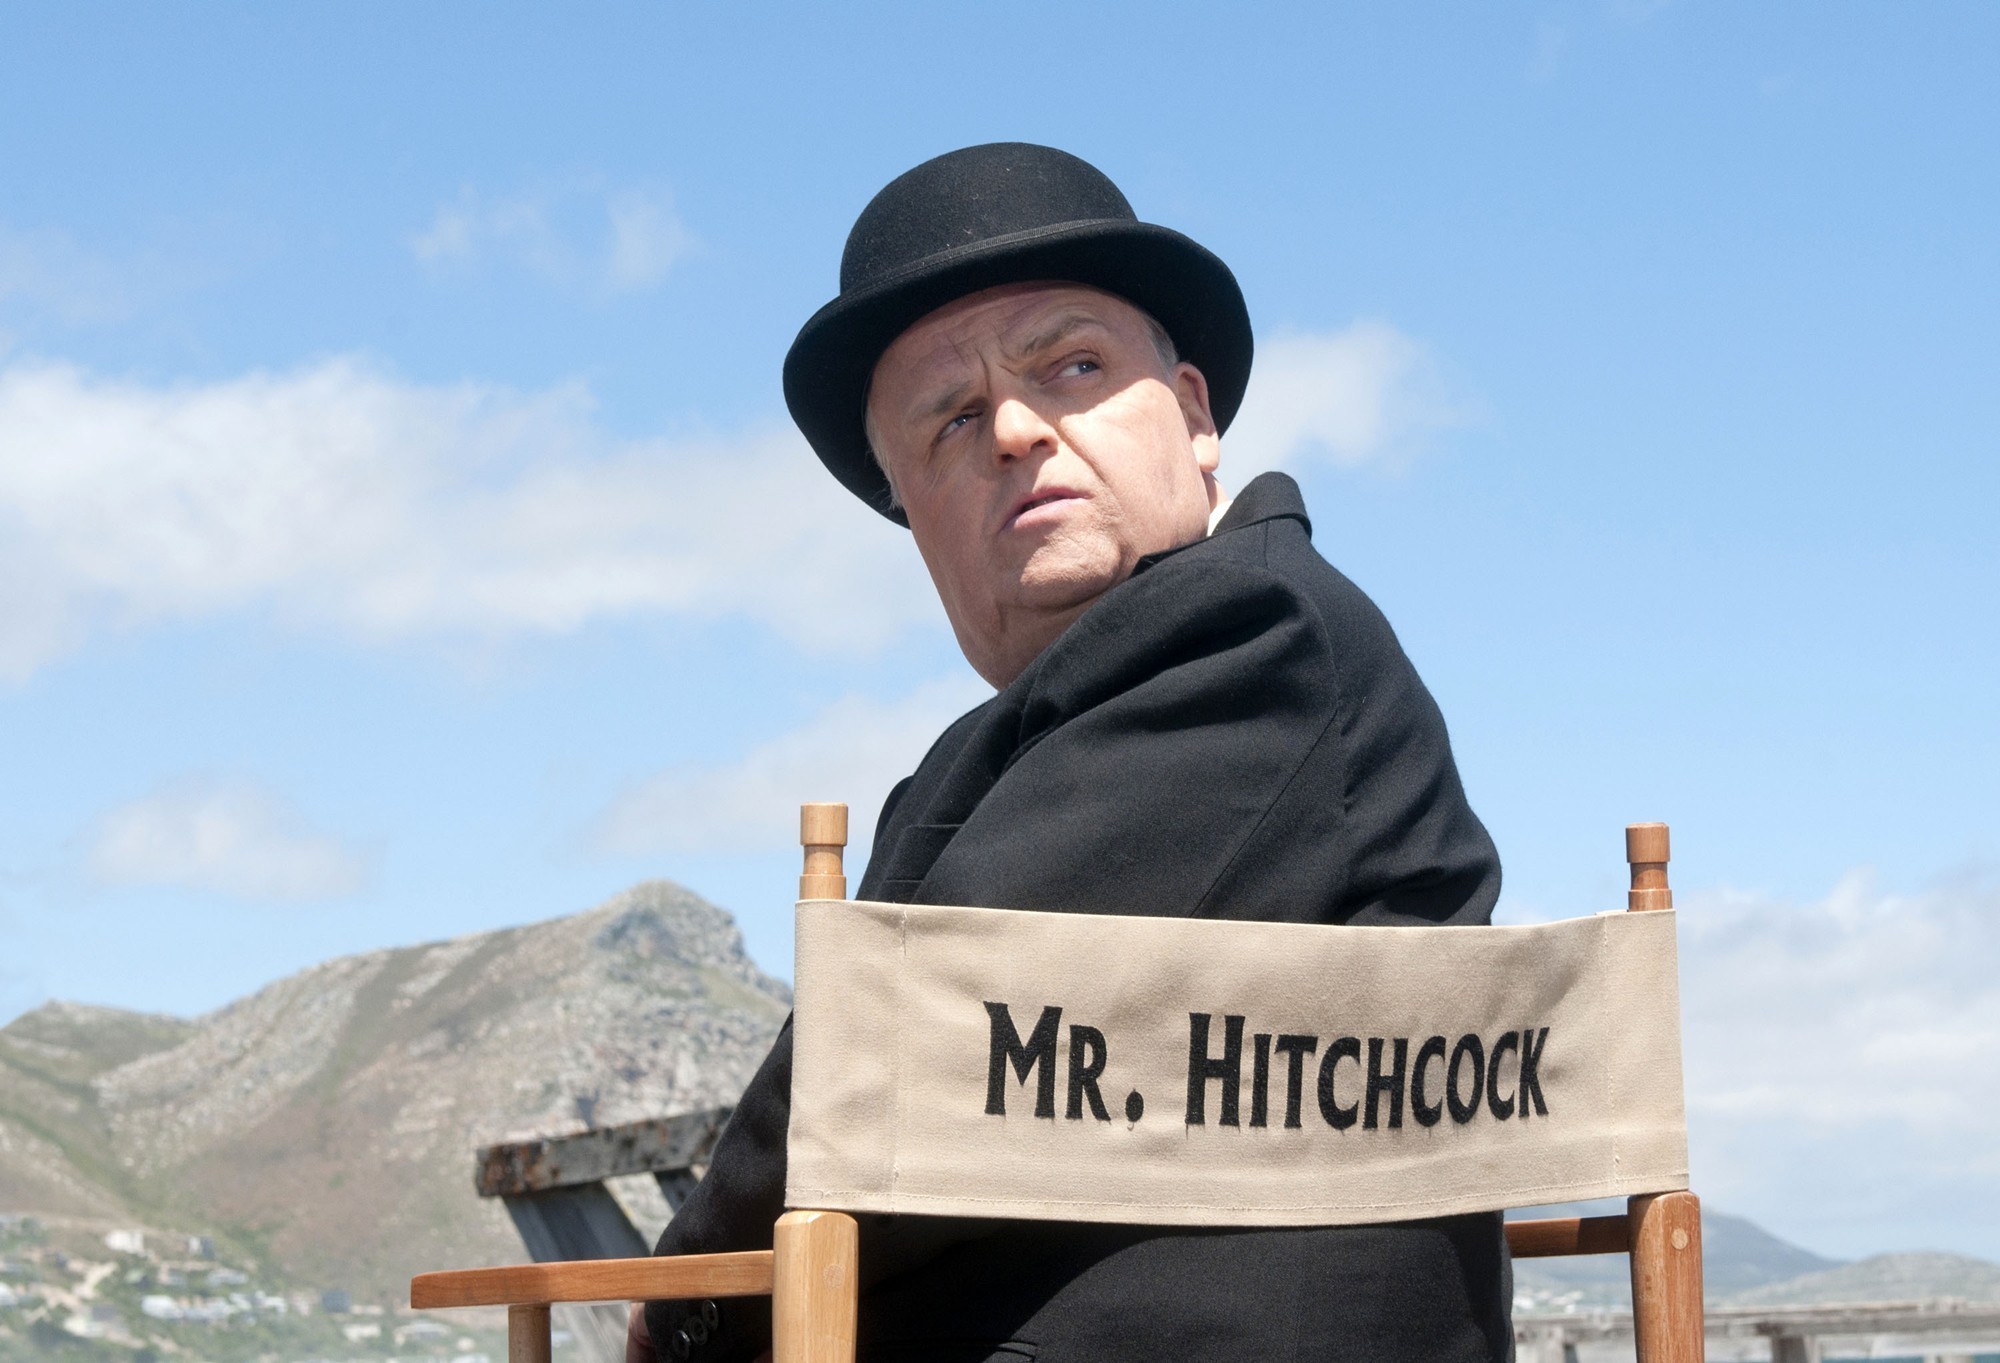 Toby Jones stars as Alfred Hitchcock in HBO Films' The Girl (2012)